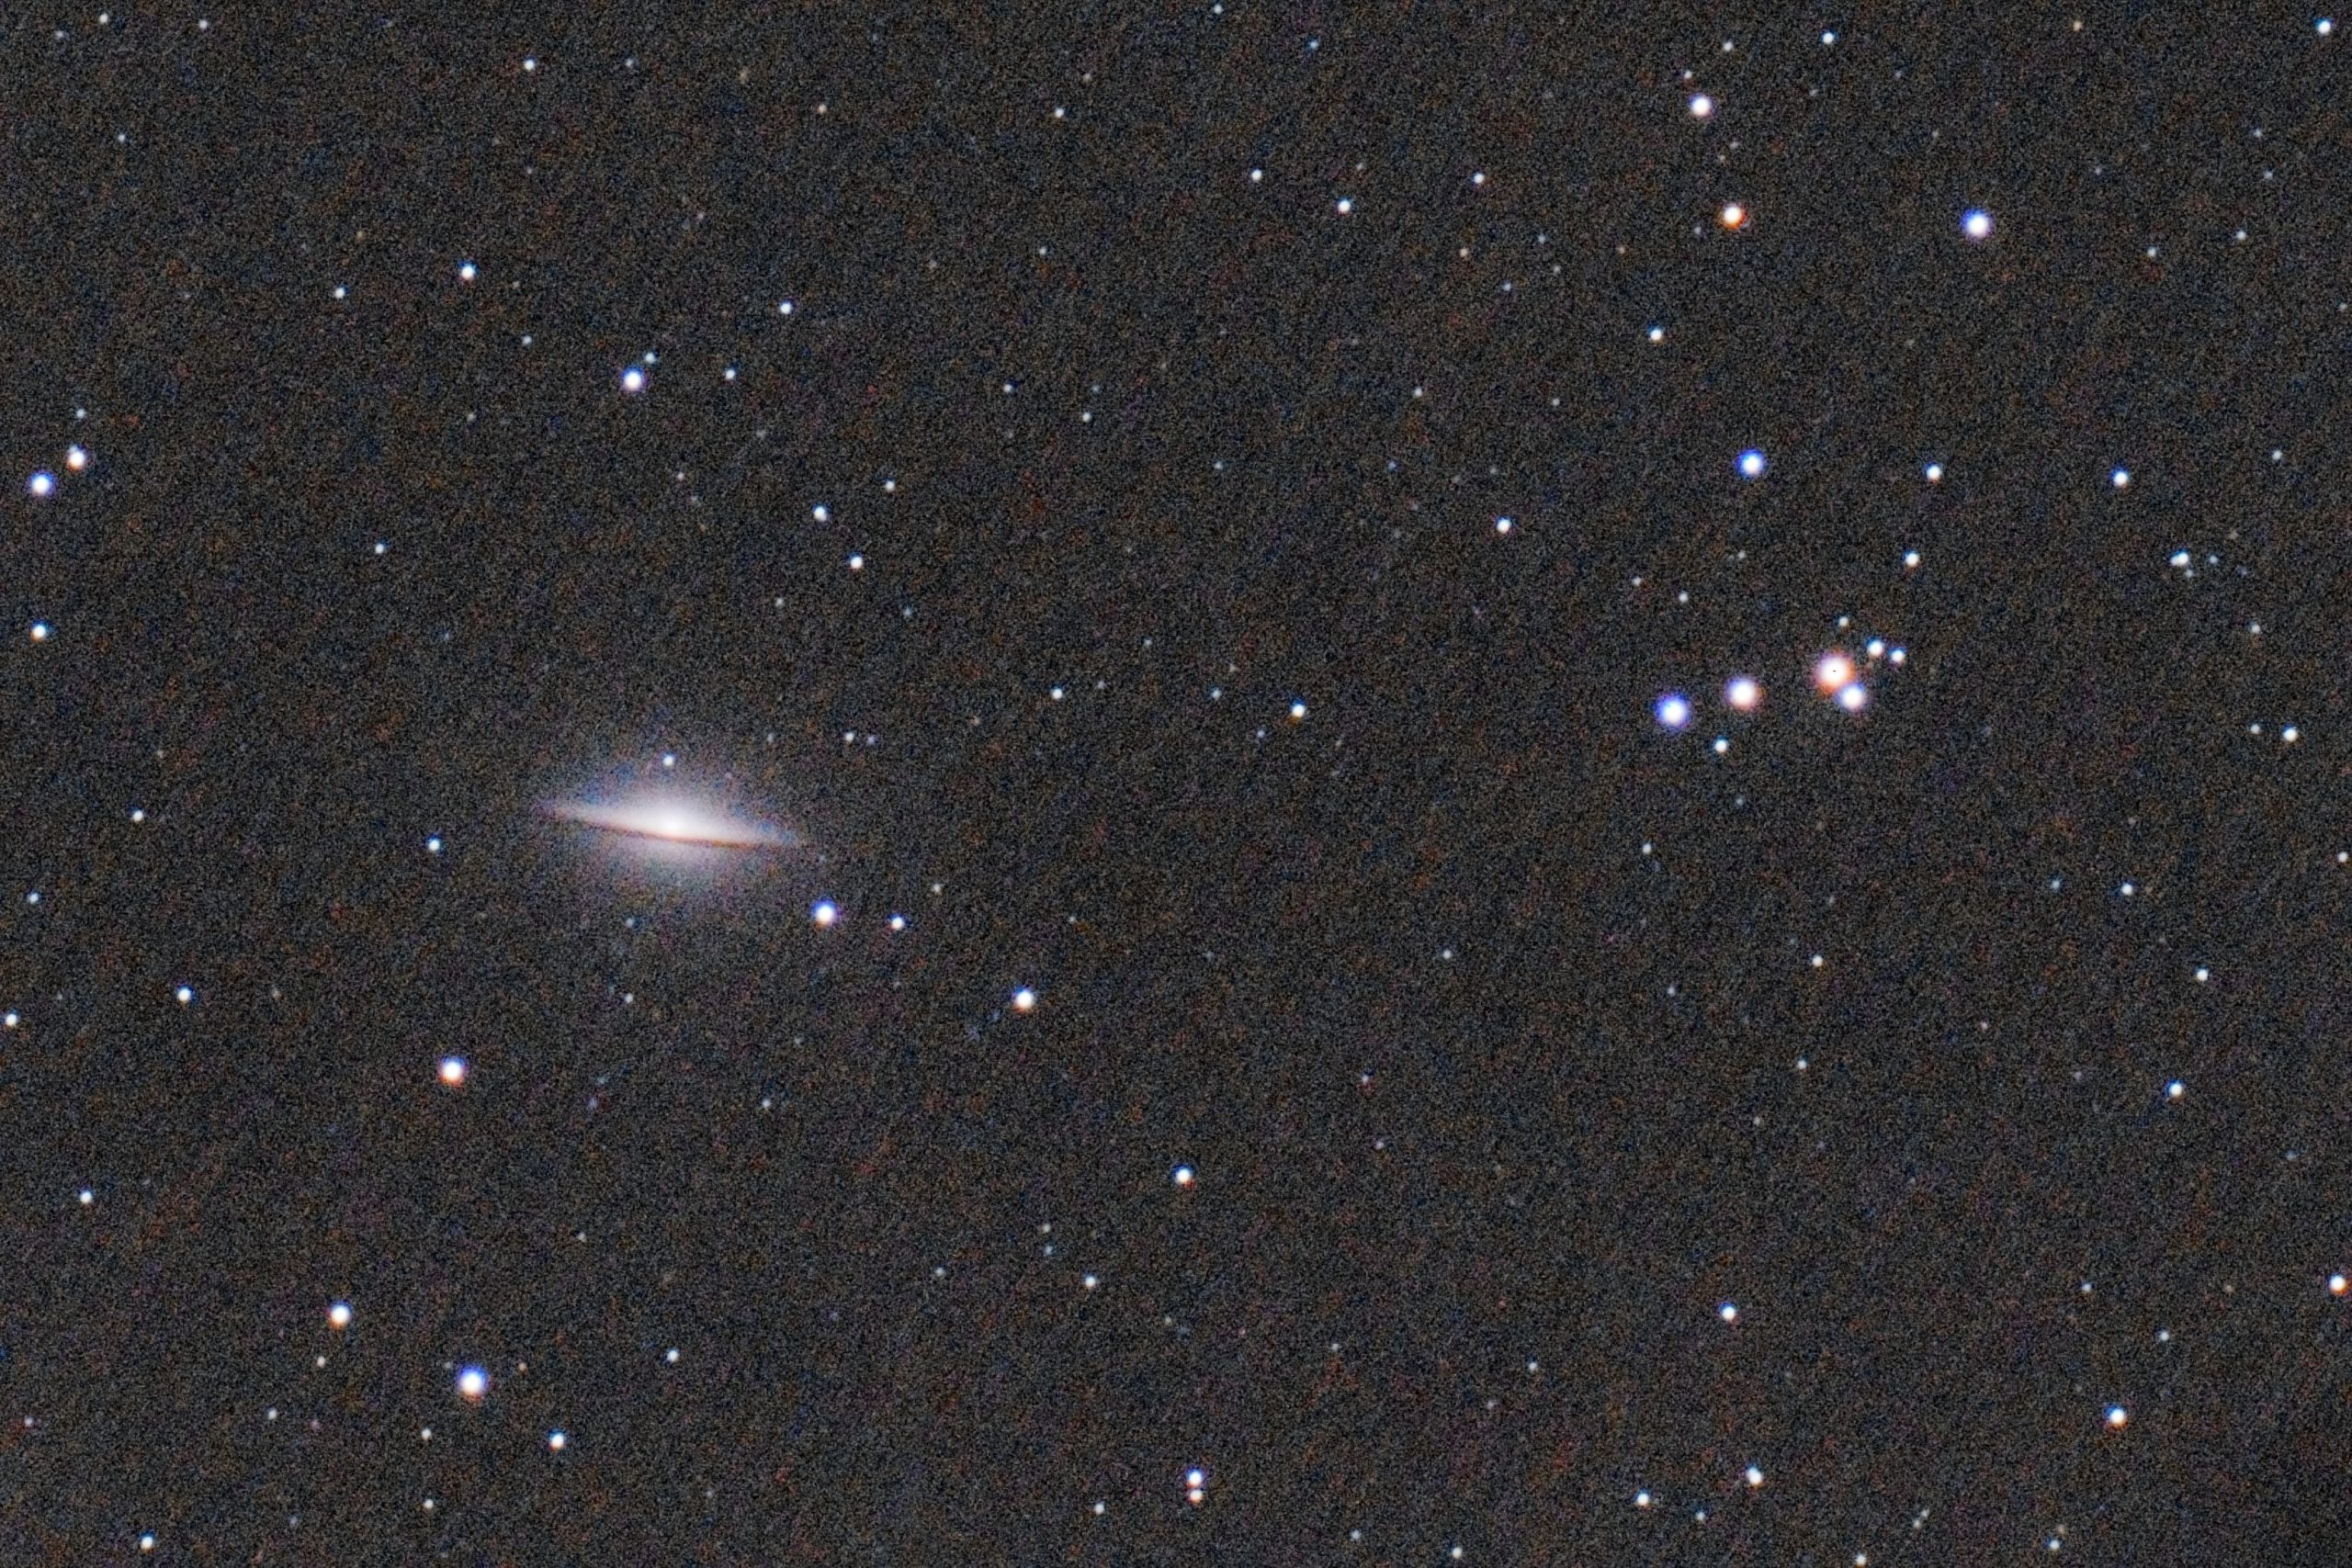 Sombrero Galaxy (Messier 104), fantastic astrophotography target to shoot at Spring - April, May, or June.